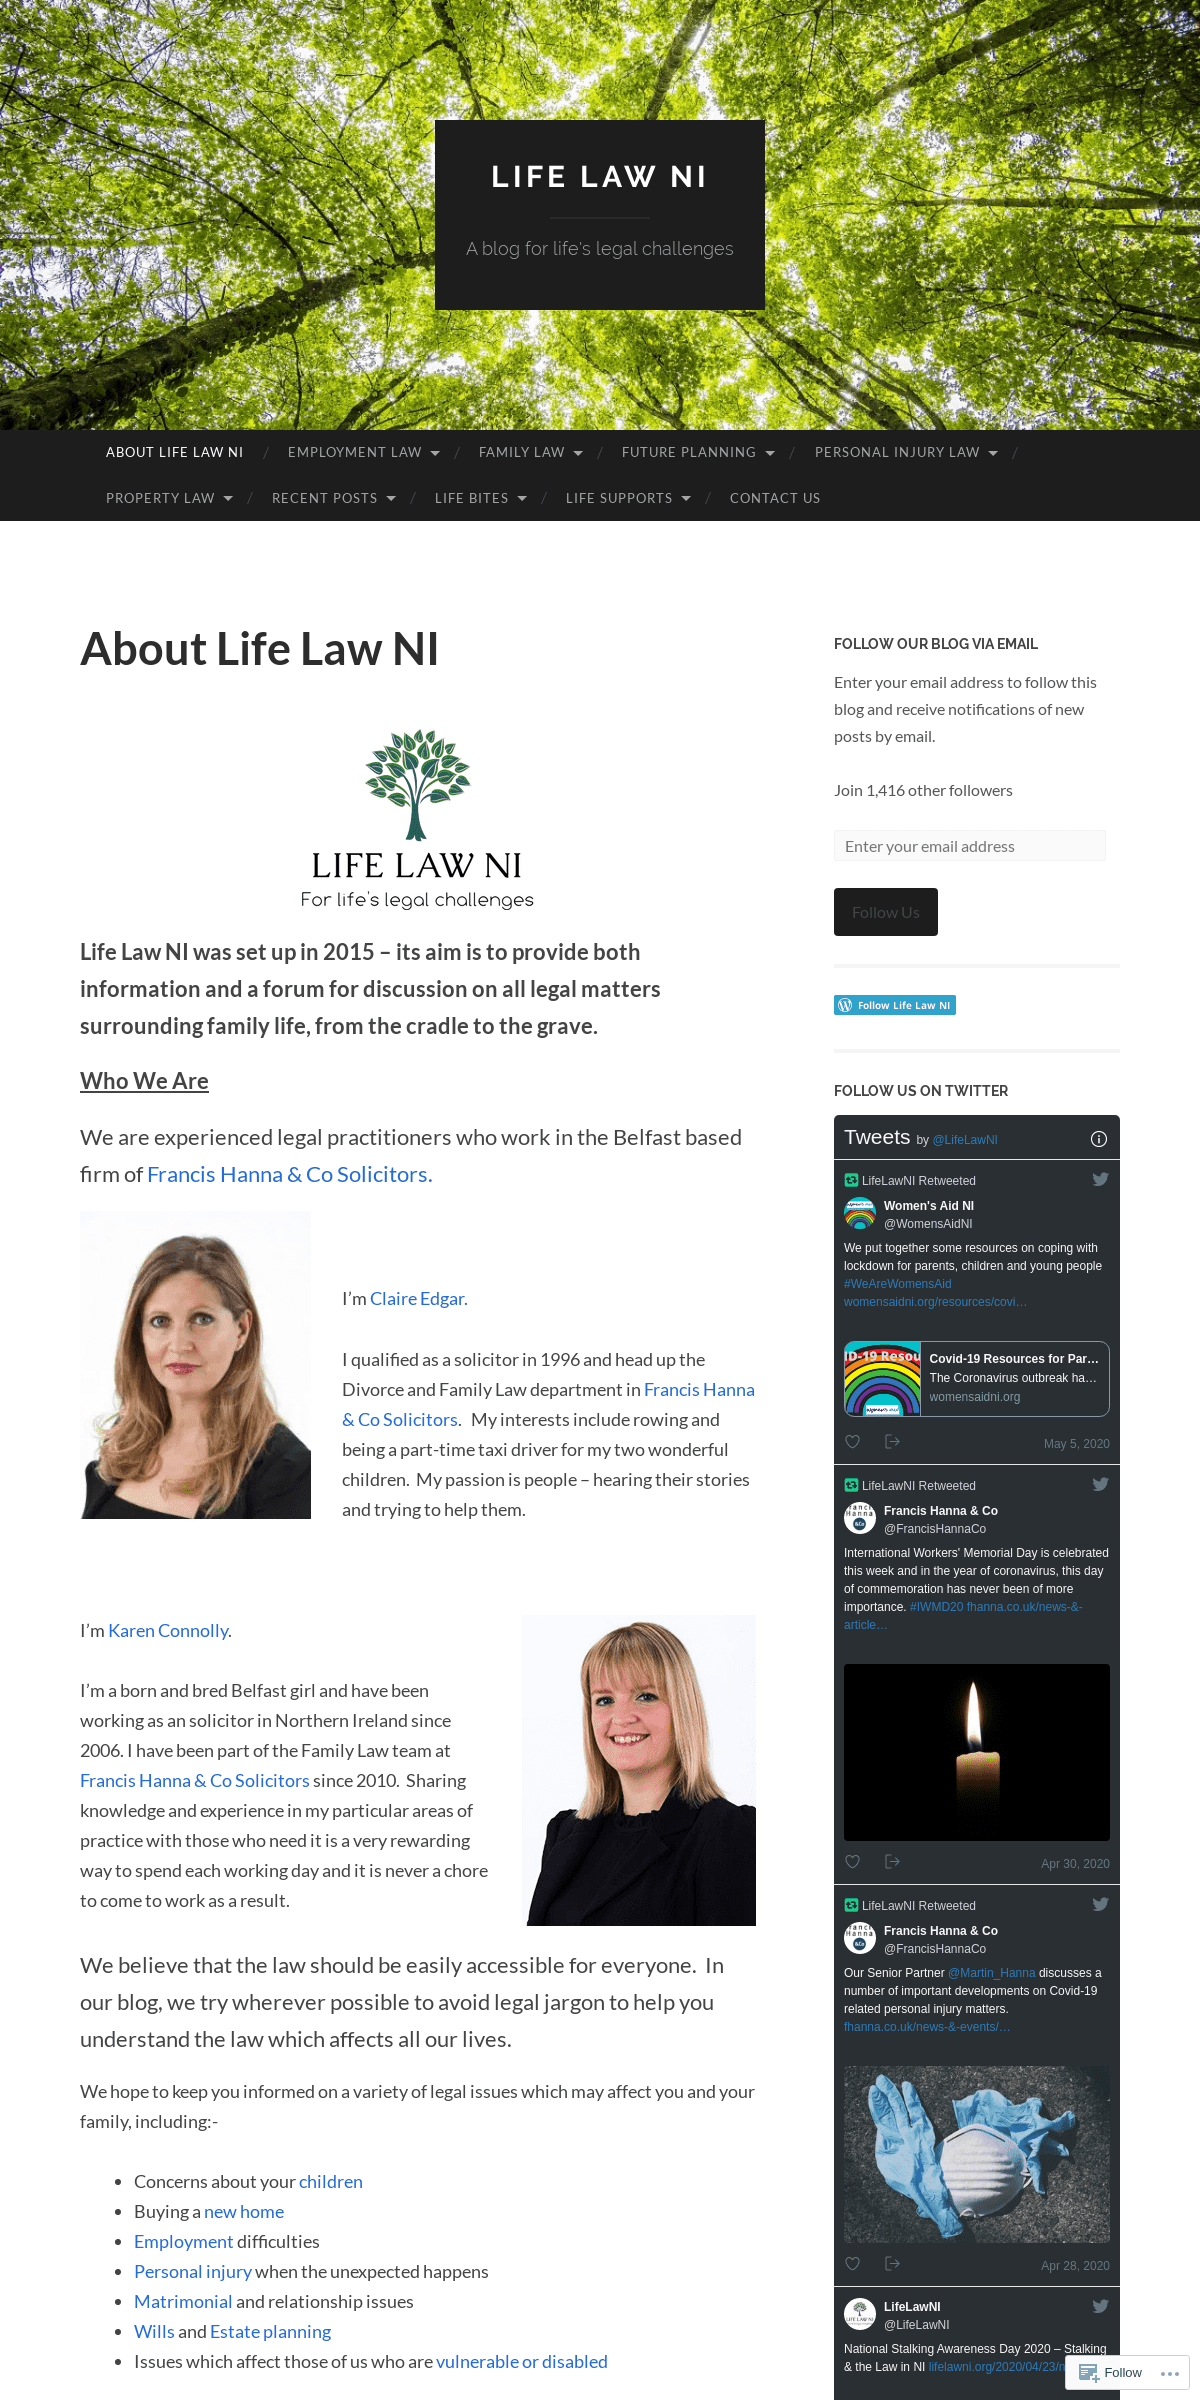 A complete backup of lifelawni.org